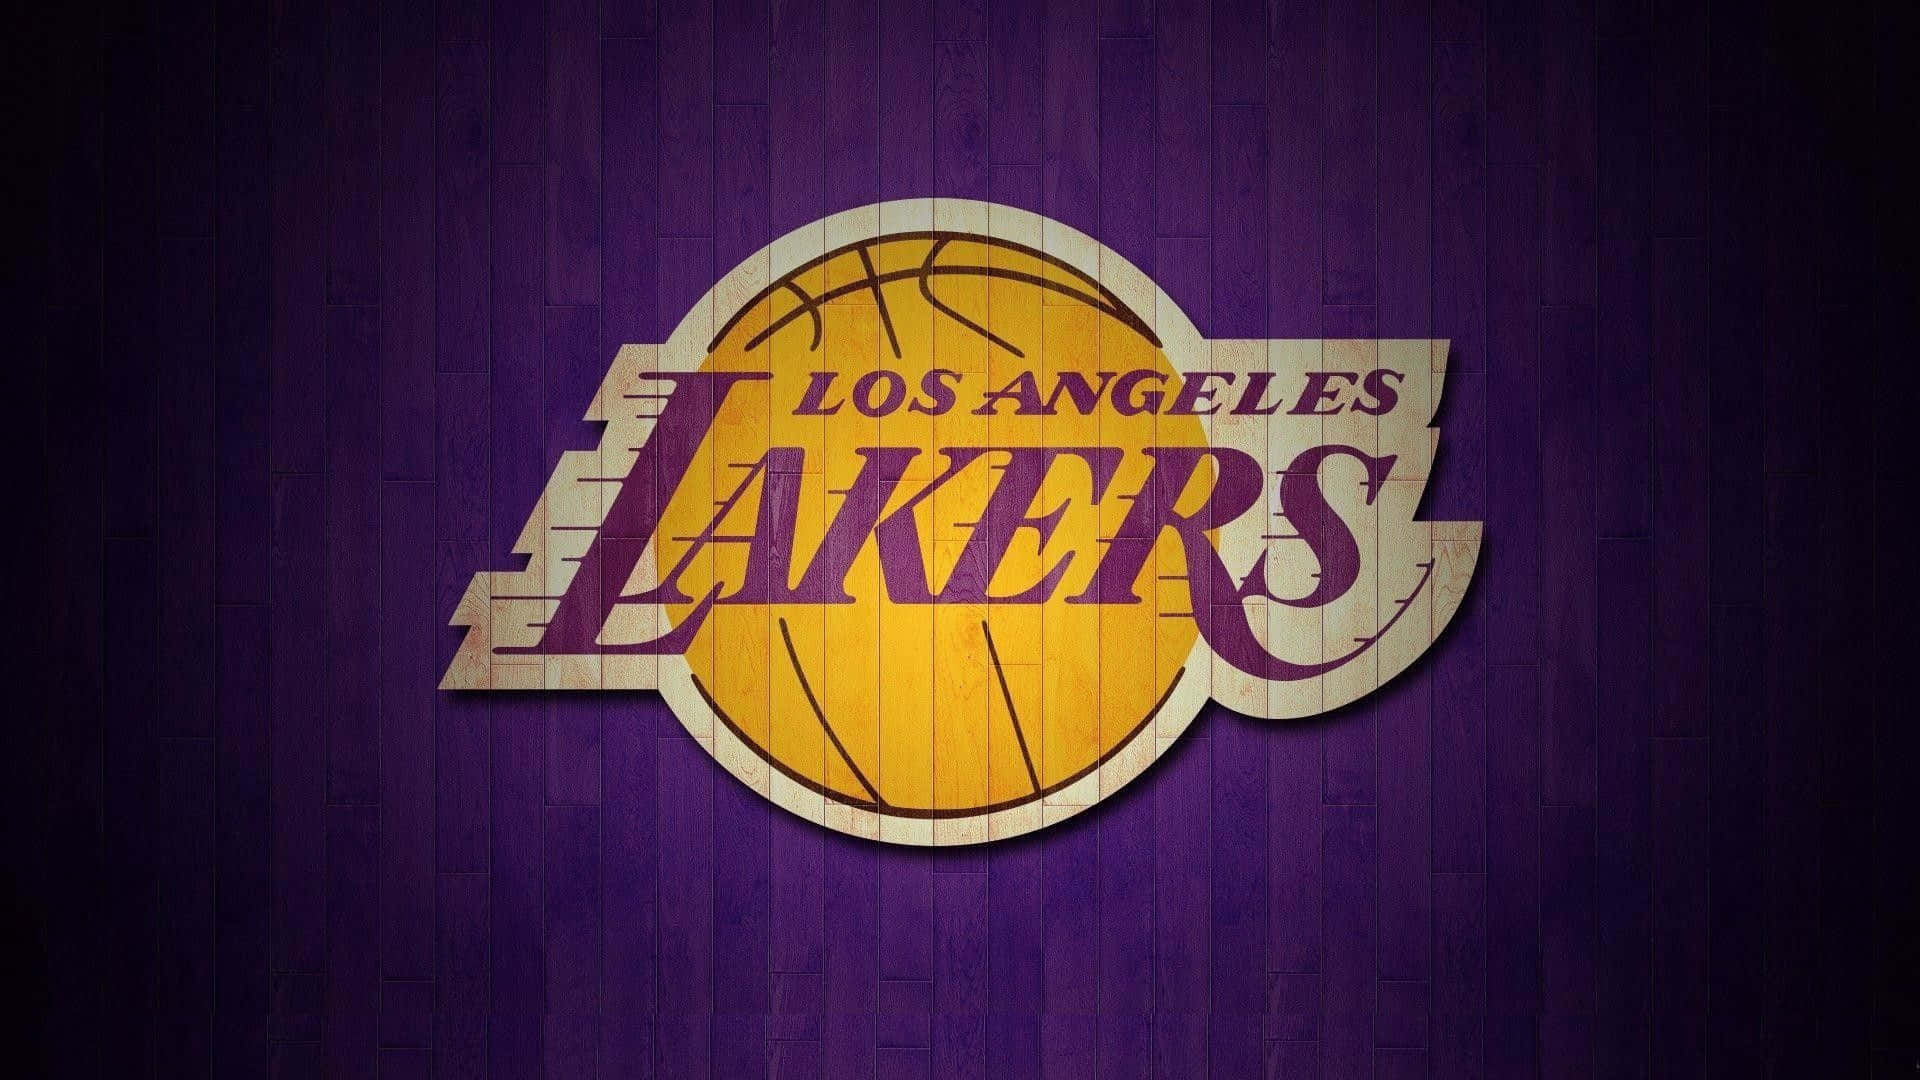 The Los Angeles Lakers take center court